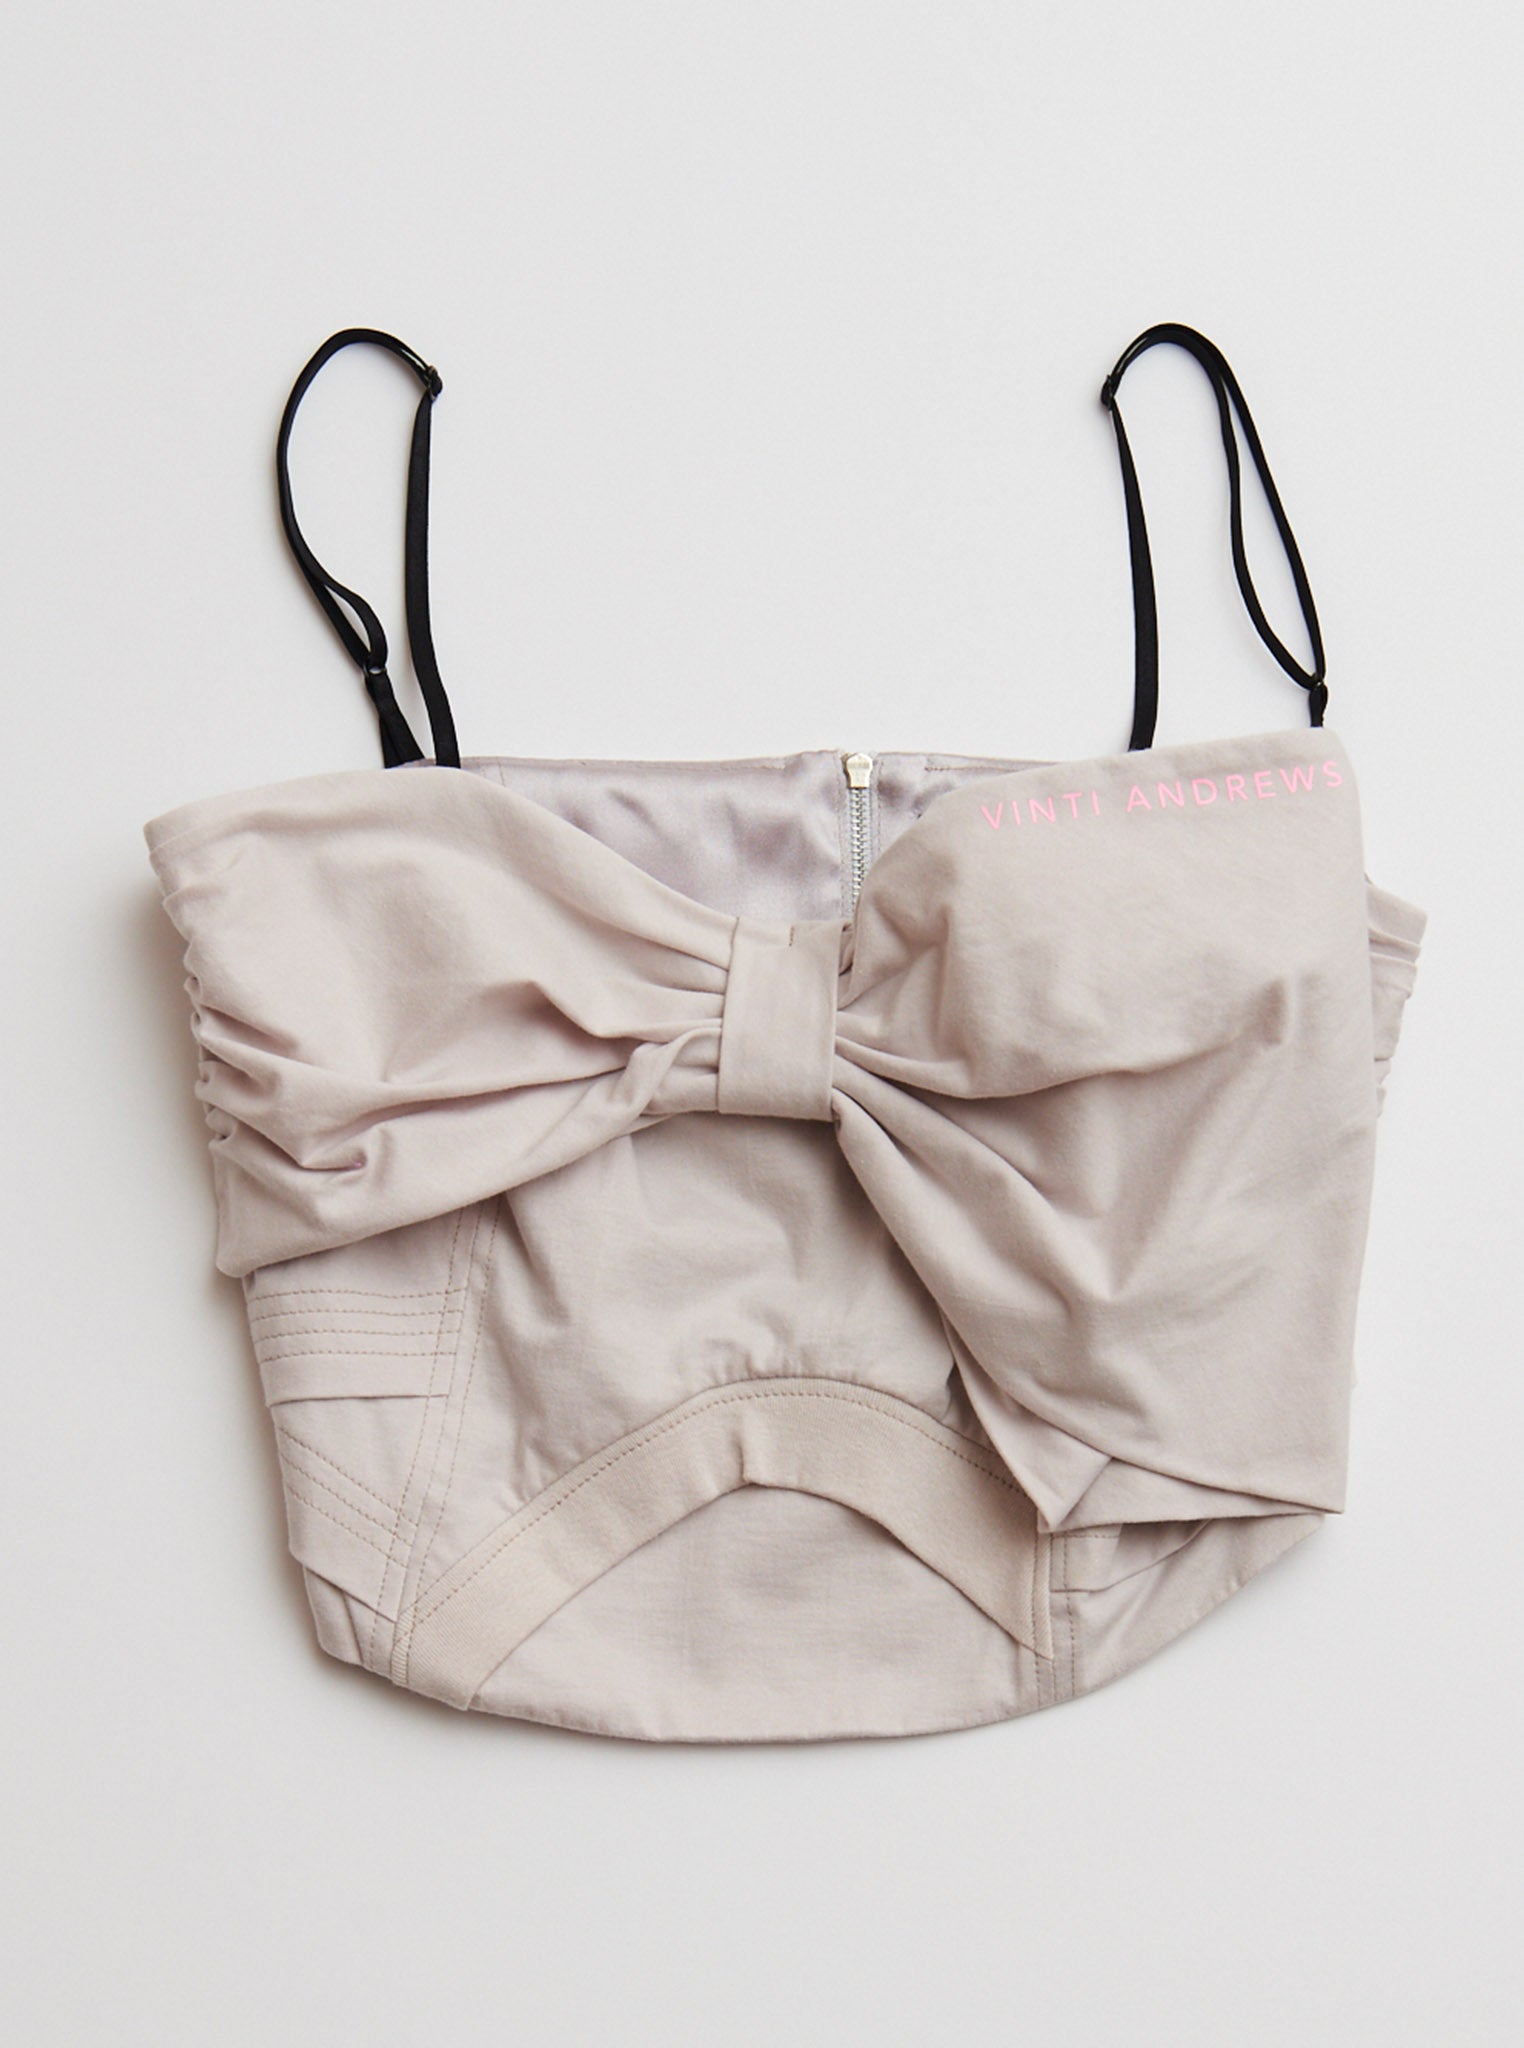 Vinti Andrews Bow T-Shirt Bustier Grey